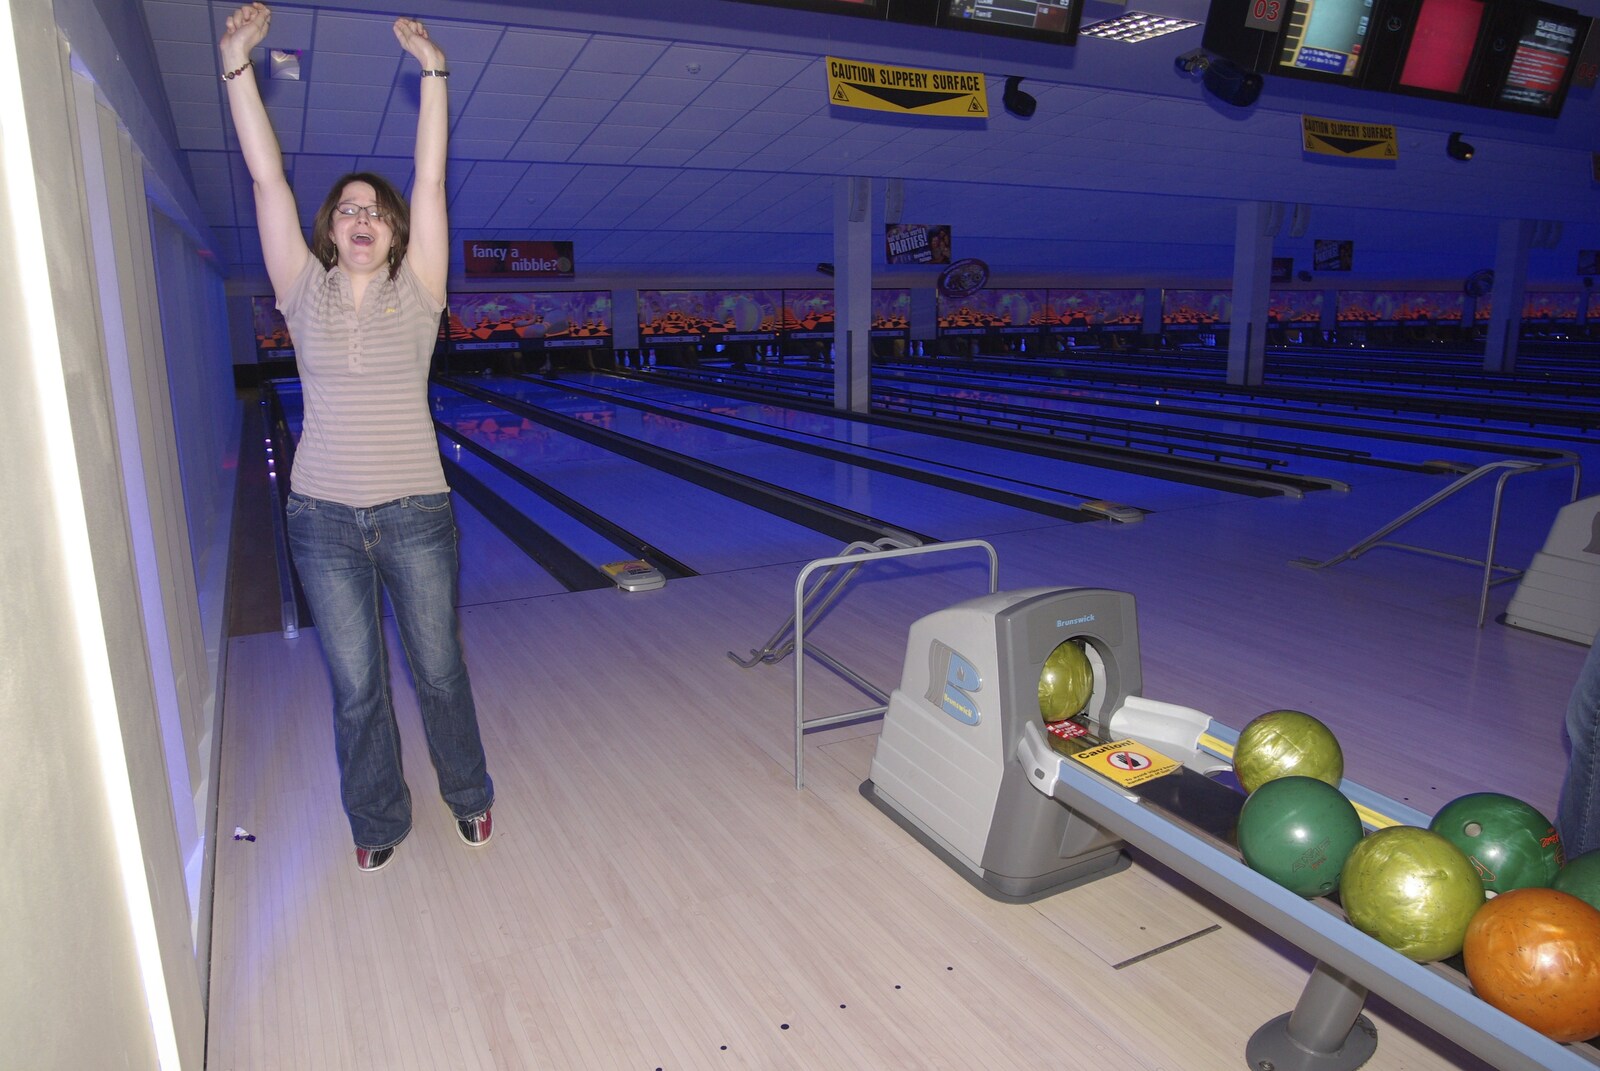 Annie makes another spare as the lanes go dark from Ten-pin Bowling and Birthdays, Cambridge Leisure Park, Cambridge - 17th February 2007